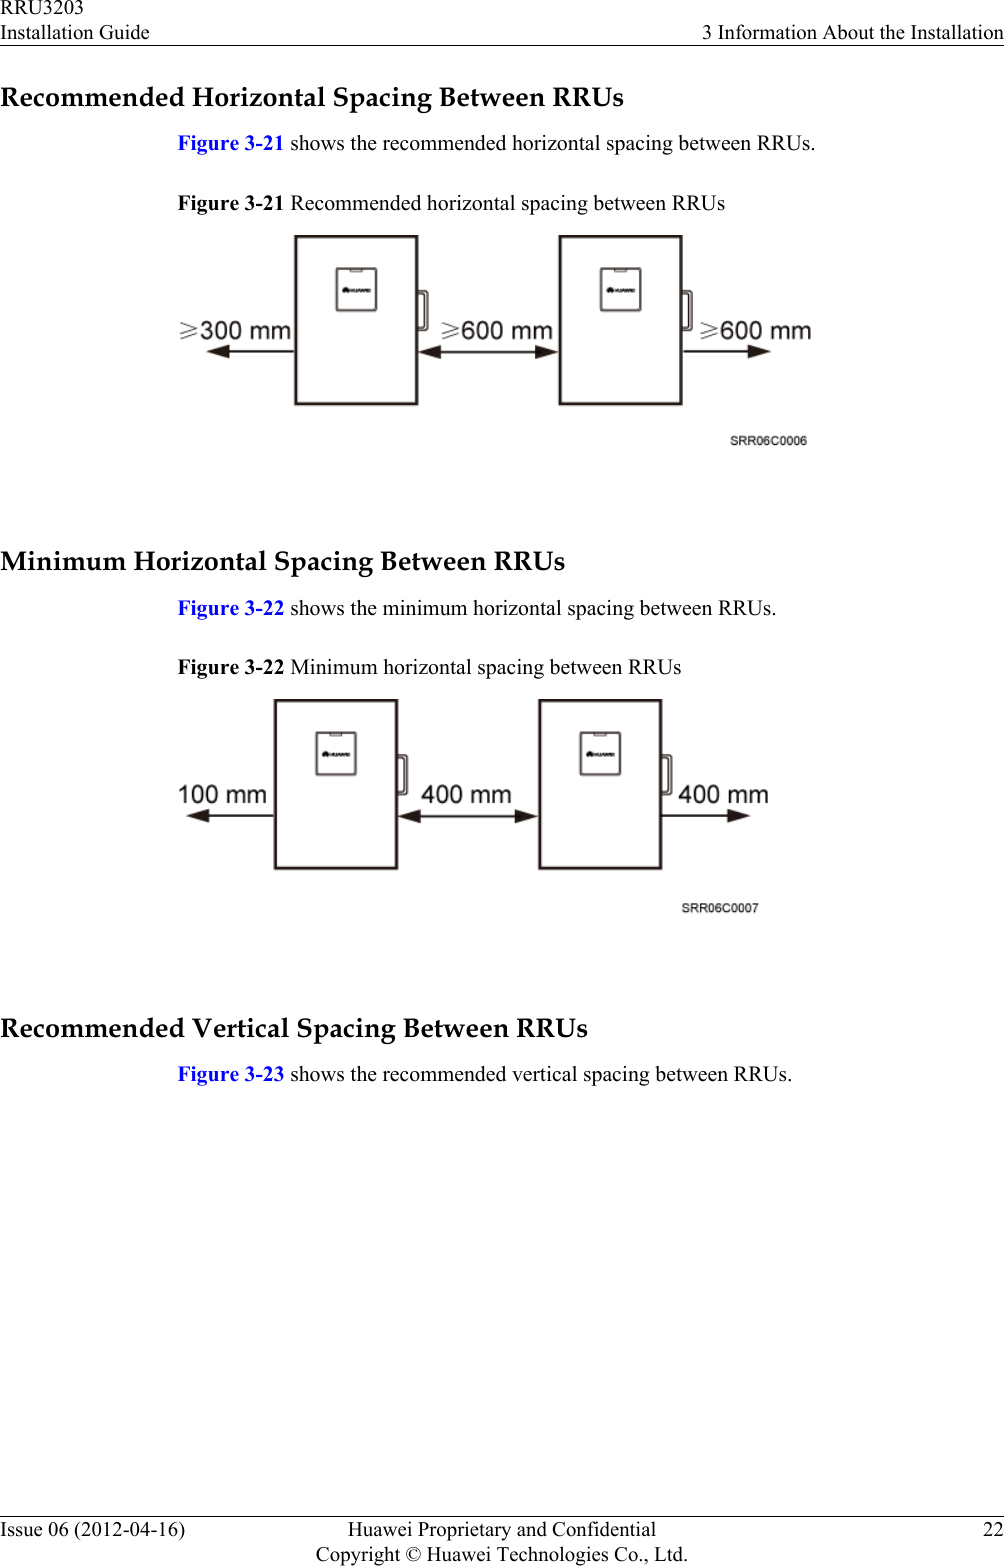 Recommended Horizontal Spacing Between RRUsFigure 3-21 shows the recommended horizontal spacing between RRUs.Figure 3-21 Recommended horizontal spacing between RRUs Minimum Horizontal Spacing Between RRUsFigure 3-22 shows the minimum horizontal spacing between RRUs.Figure 3-22 Minimum horizontal spacing between RRUs Recommended Vertical Spacing Between RRUsFigure 3-23 shows the recommended vertical spacing between RRUs.RRU3203Installation Guide 3 Information About the InstallationIssue 06 (2012-04-16) Huawei Proprietary and ConfidentialCopyright © Huawei Technologies Co., Ltd.22